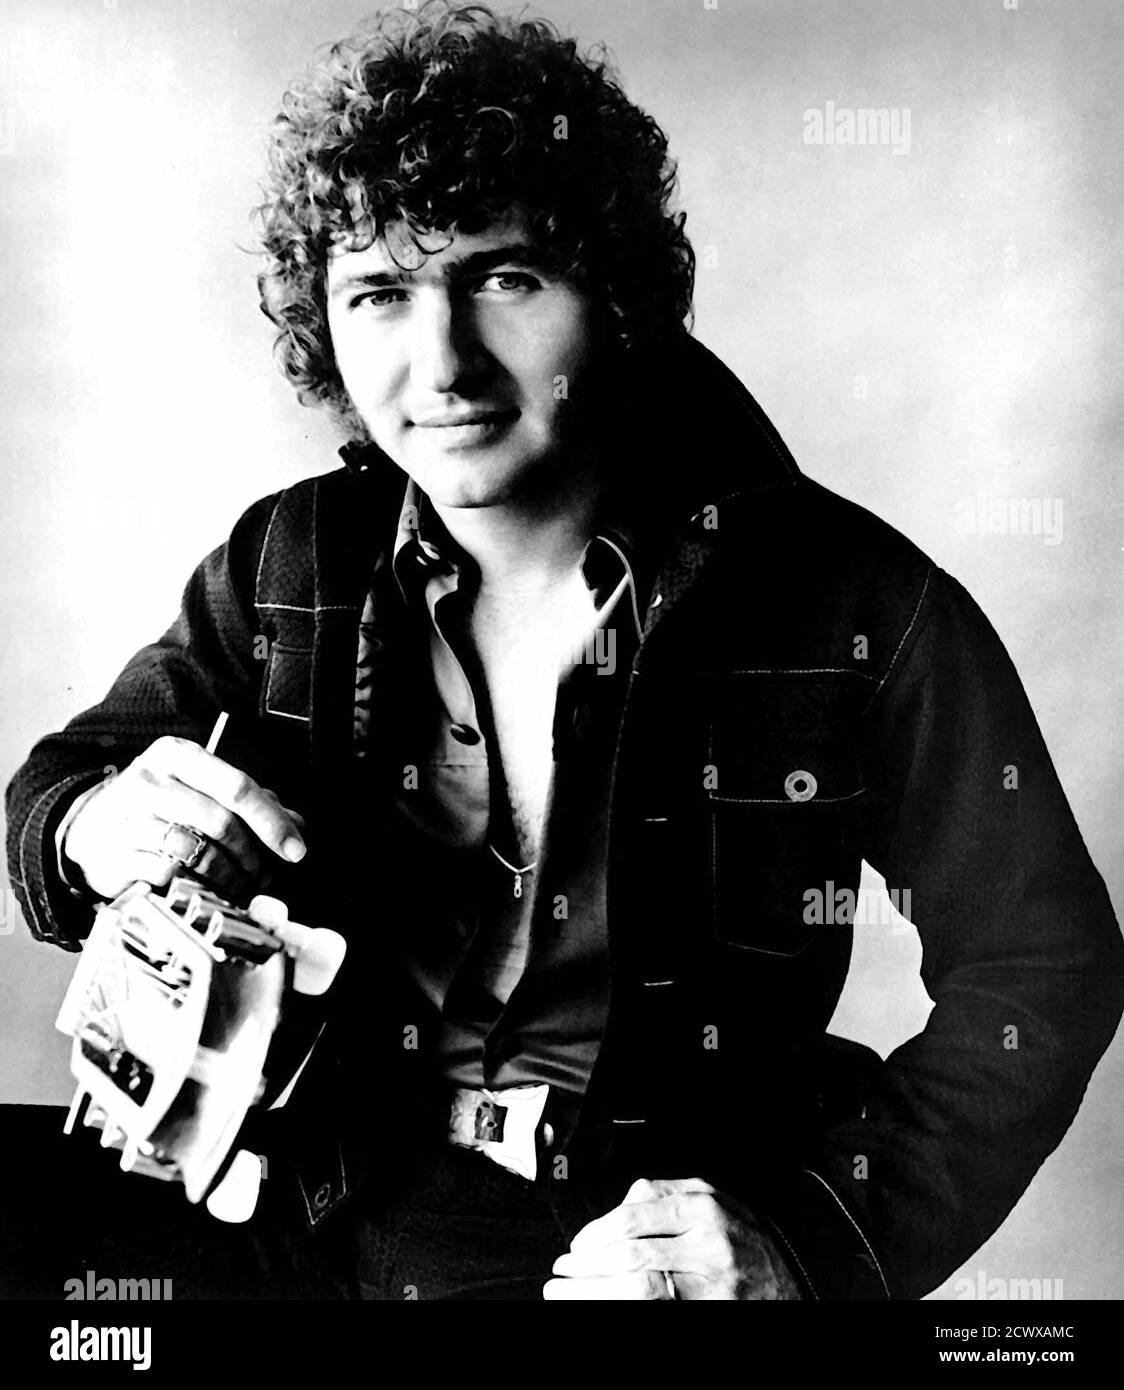 September 30, 2020: Legendary country singer and songwriter MAC DAVIS died at the age of 78. Davis, who first found fame writing hits ''A Little Less Conversation'' and ''In The Ghetto'' for Elvis Presley, died following heart surgery, his manager, Jim Morey, said in a statement on Tuesday. FILE PHOTO TAKEN ON: 1980. Mac Davis studio portrait. (Credit Image: © Globe Photos/ZUMA Wire) Stock Photo